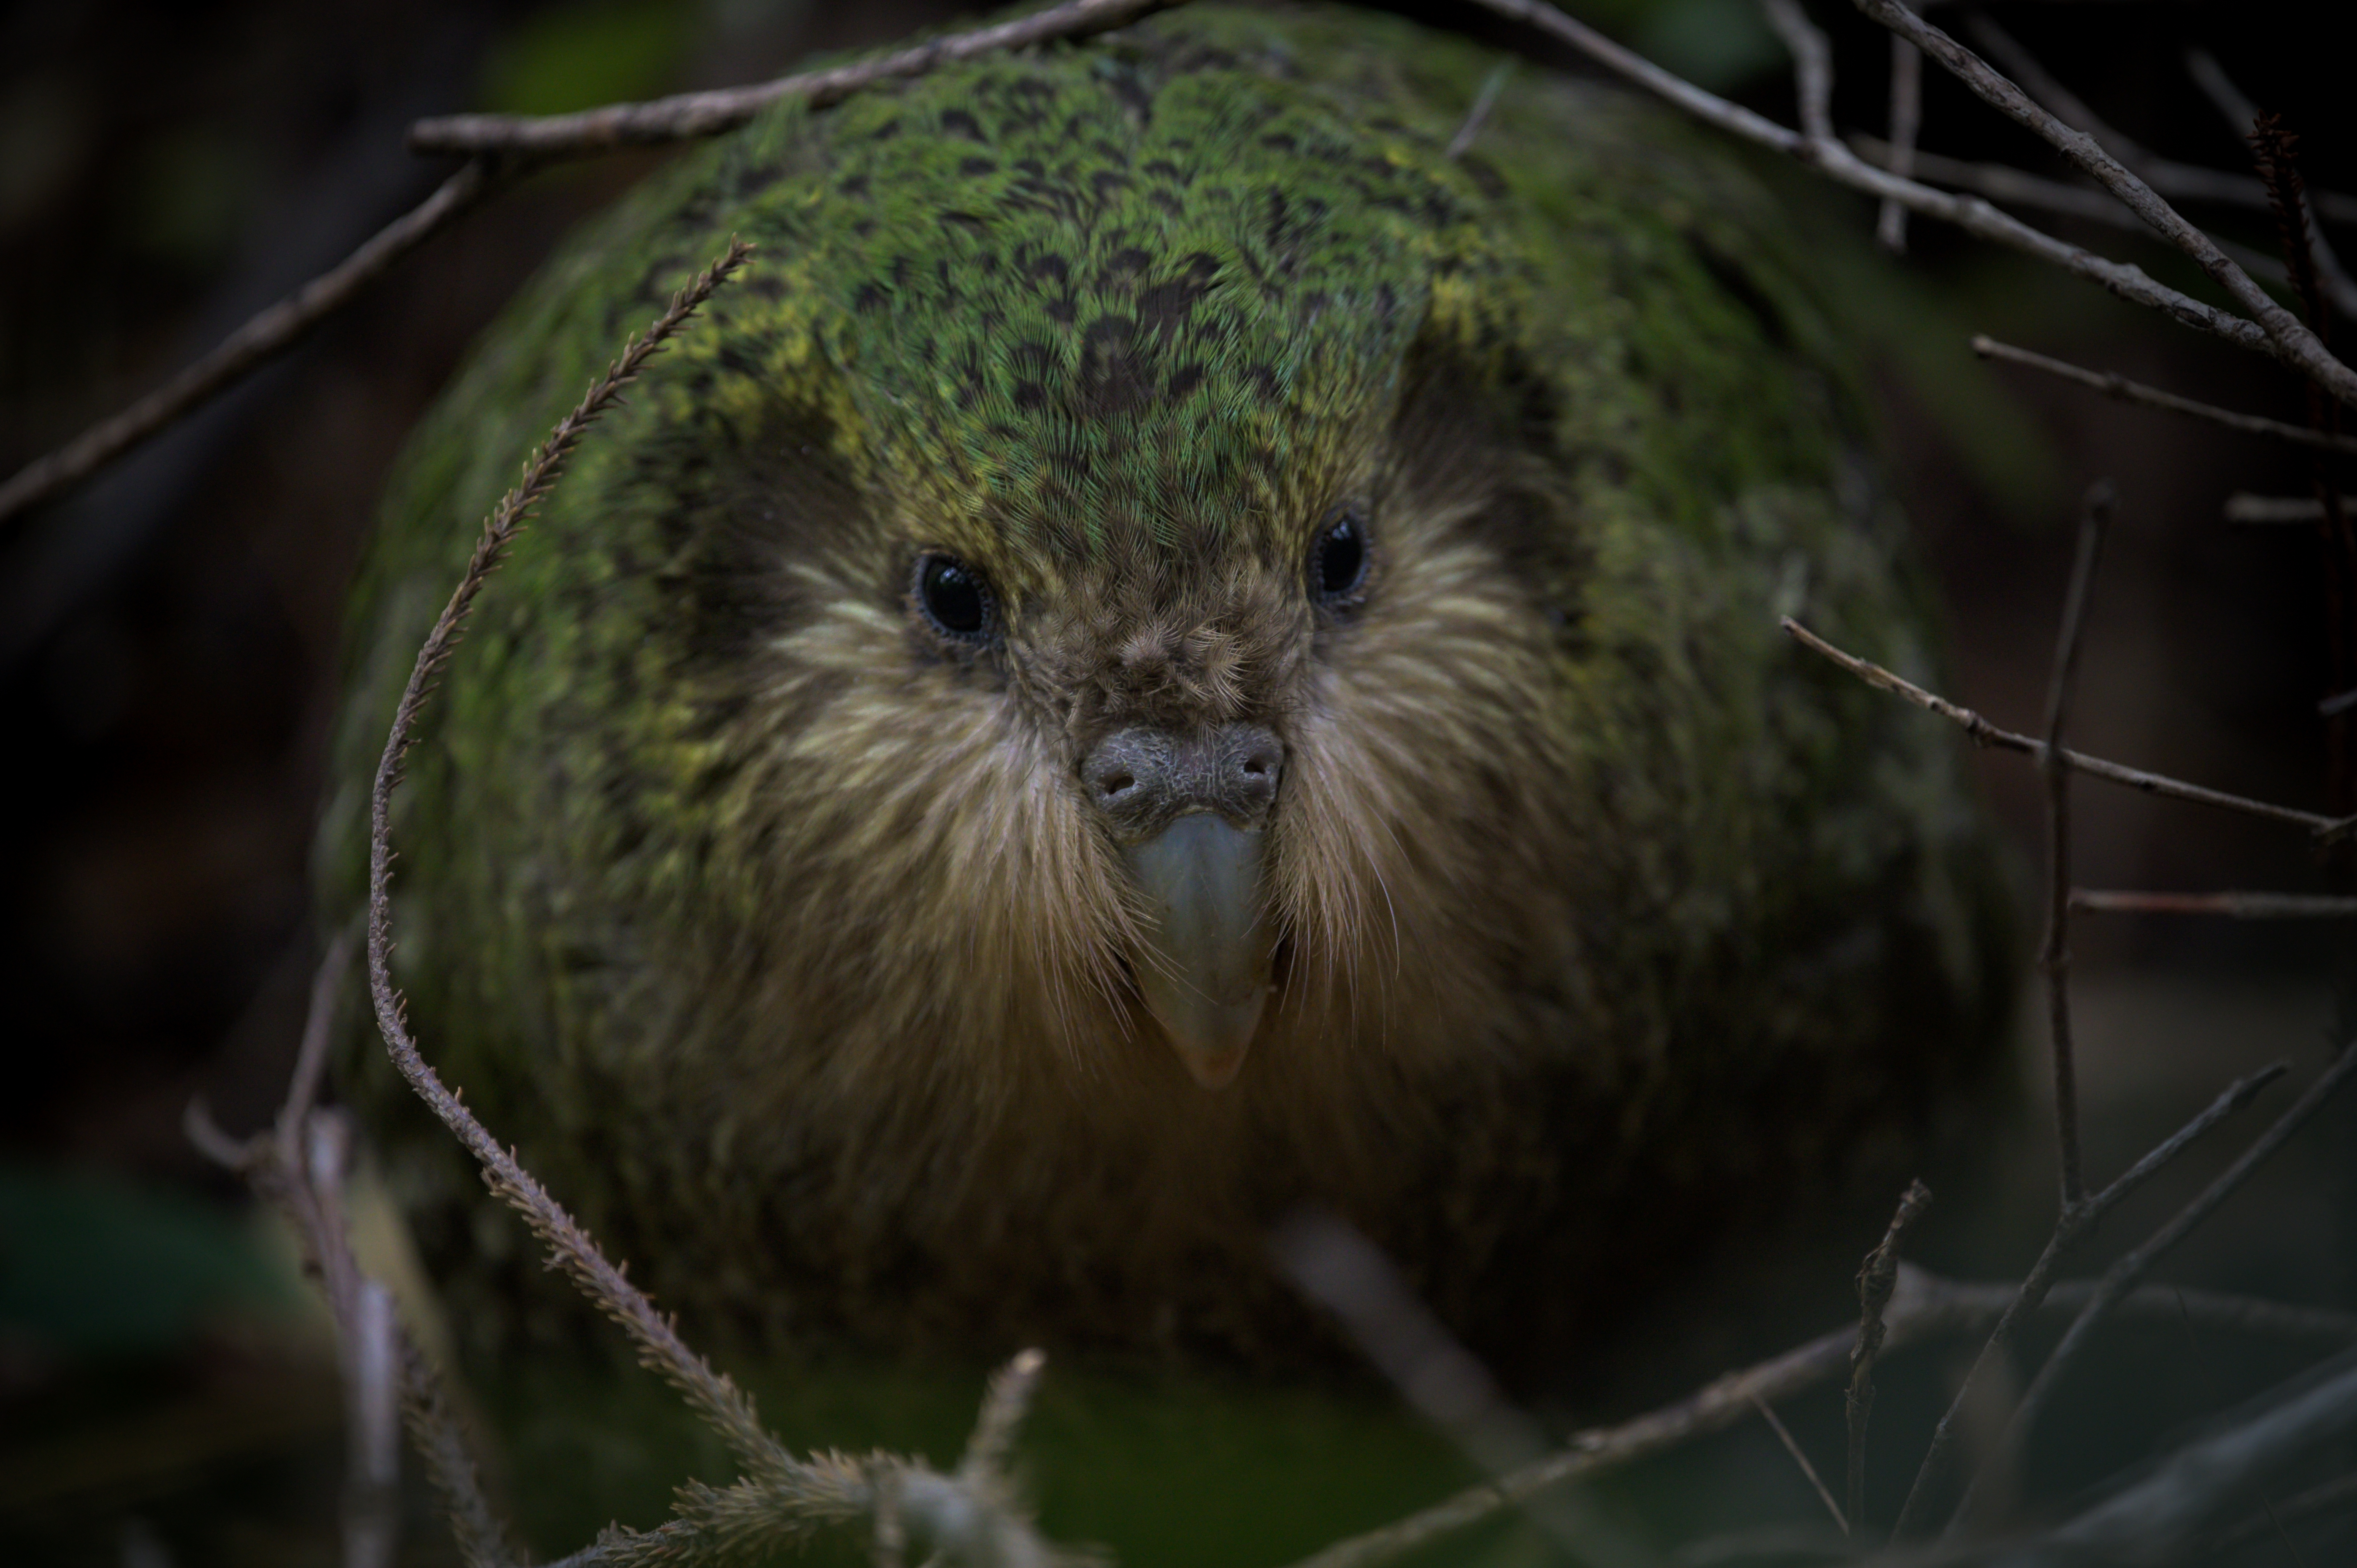 Close up picture of a Kākāpō with green plumage in native bush in mid-light looking directly at the camera